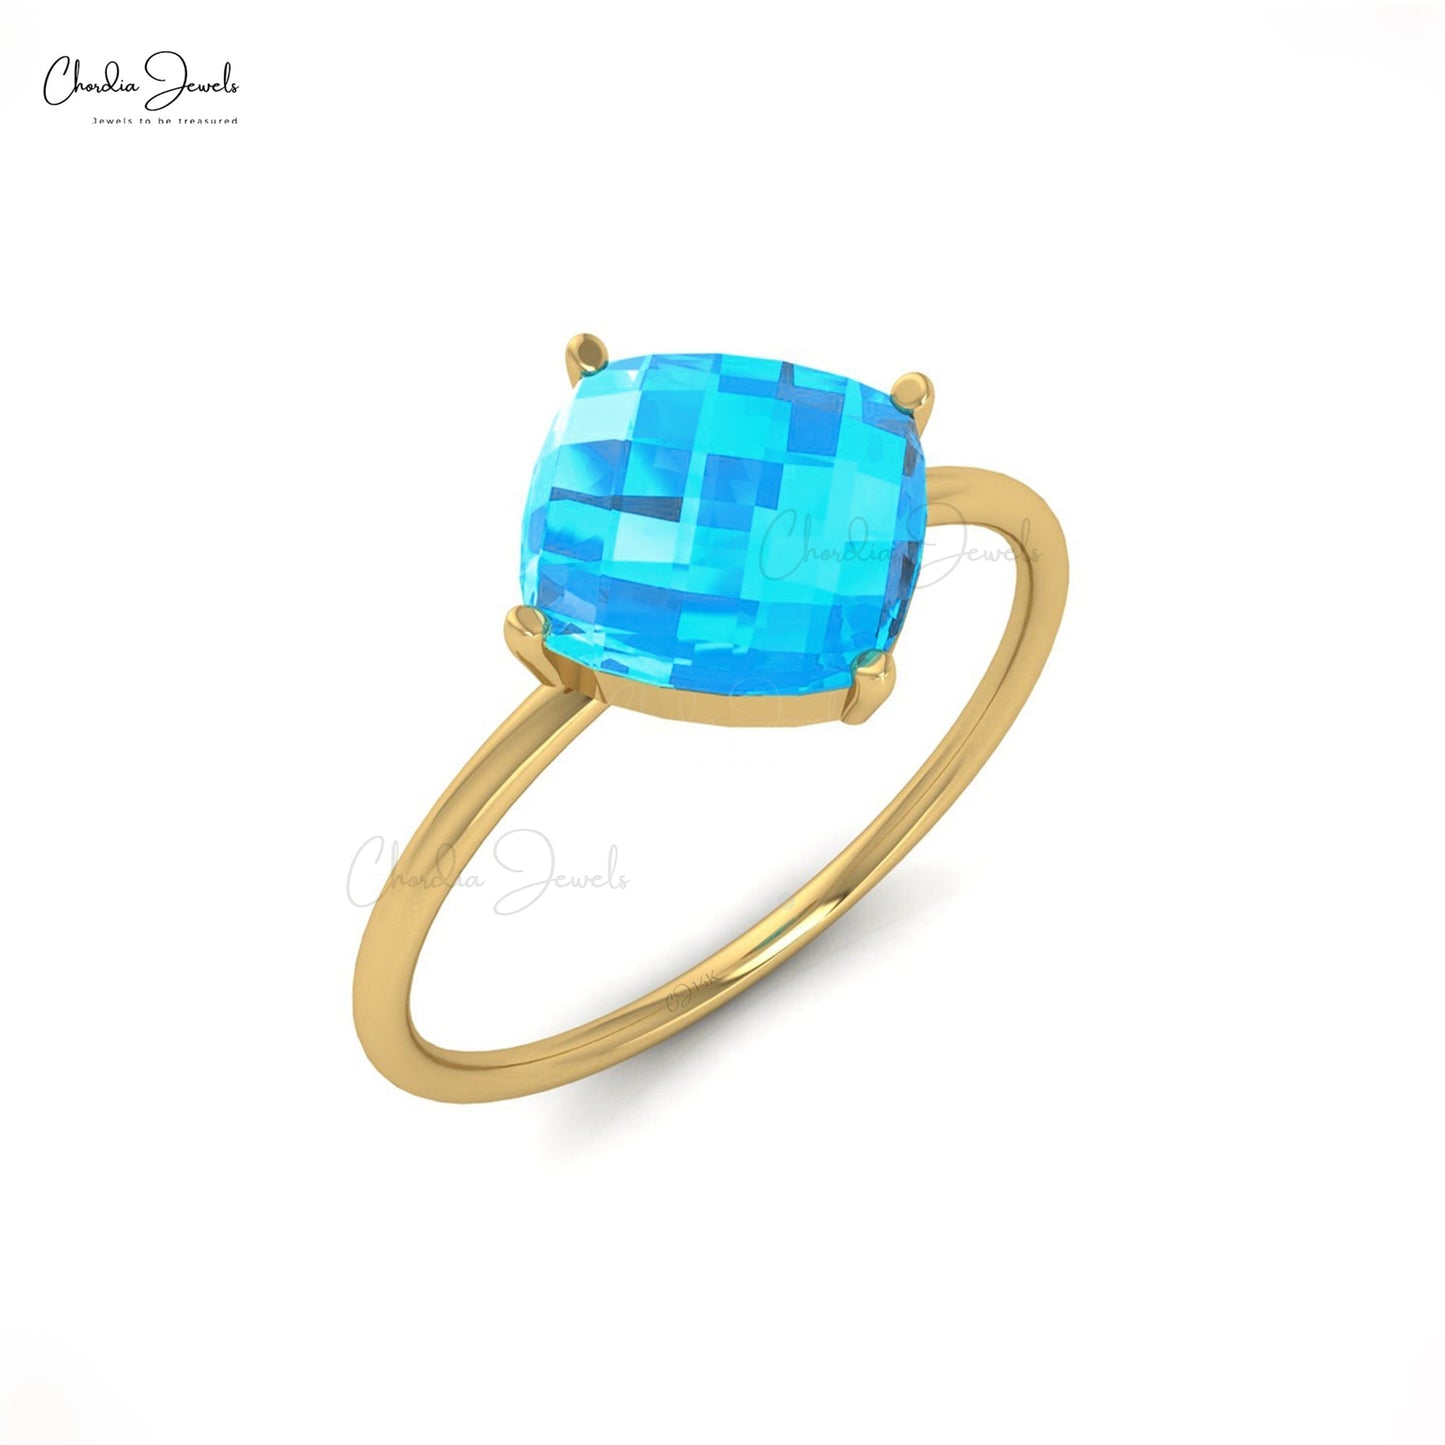 Load image into Gallery viewer, Classic 8MM Natural Swiss Blue Topaz Solitaire Engagement Ring
